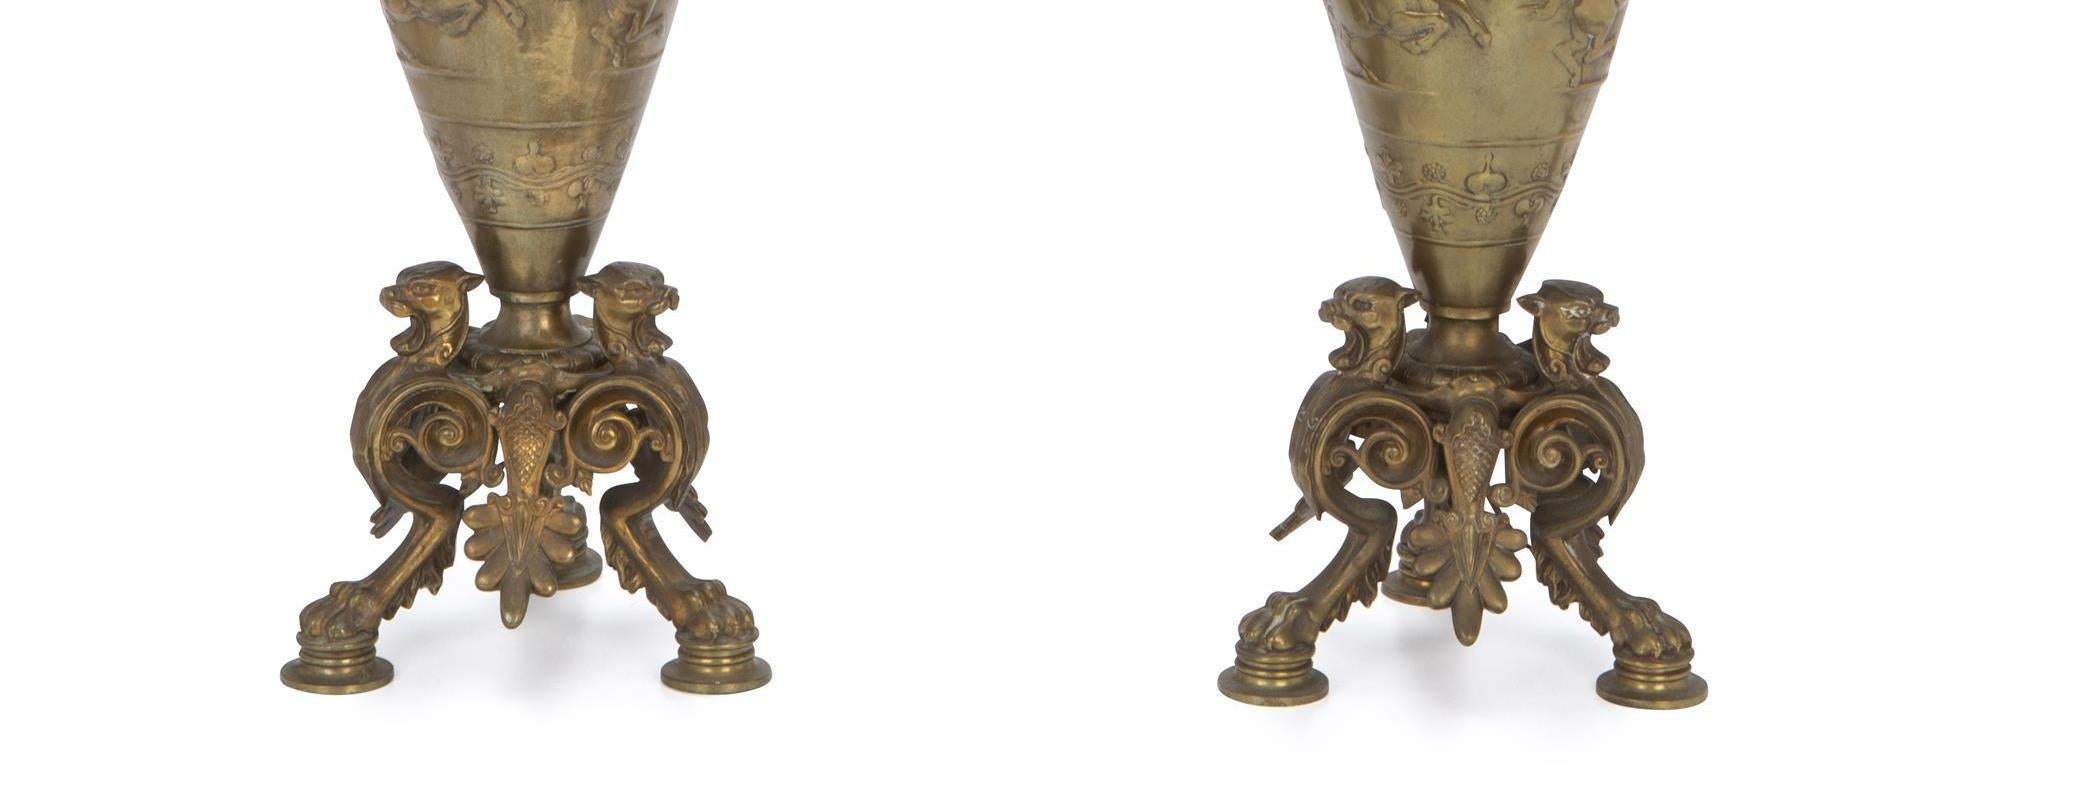 Pair of French Bronze Candelabra Lamps, Early 20th Century For Sale 2